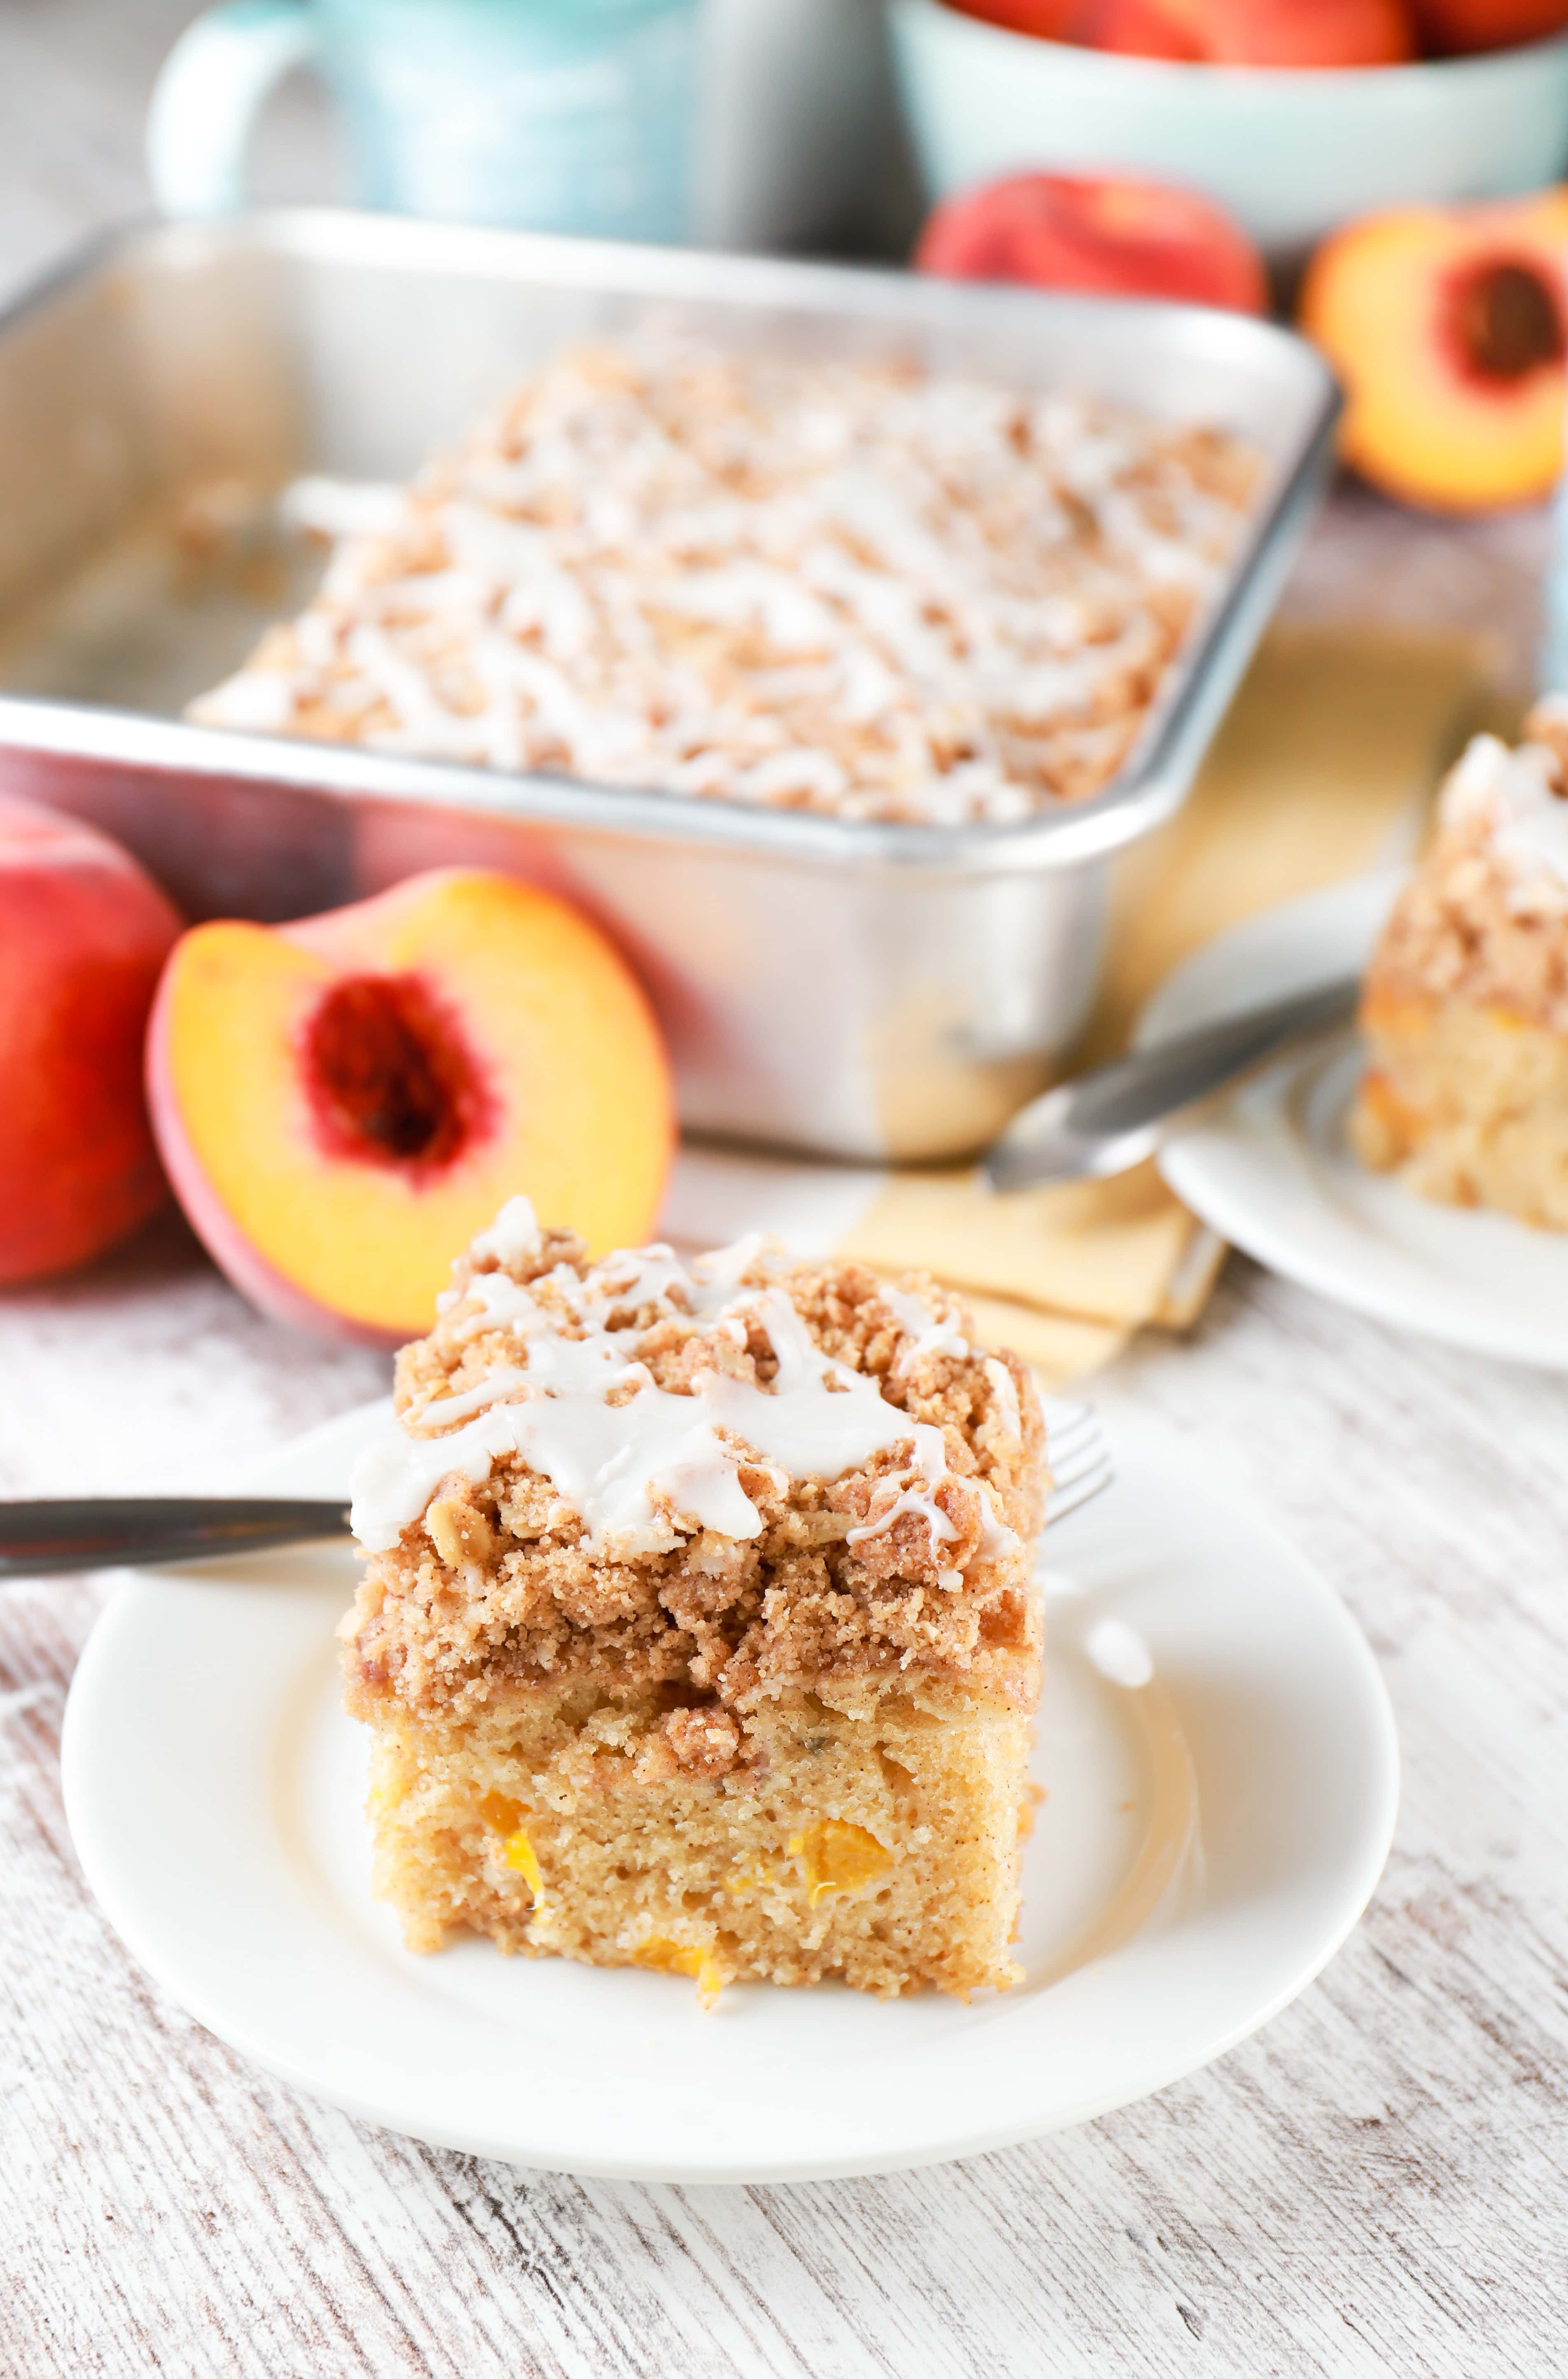 Two slices of peach coffee cake on small white plates with pan of remaining cake in the background.